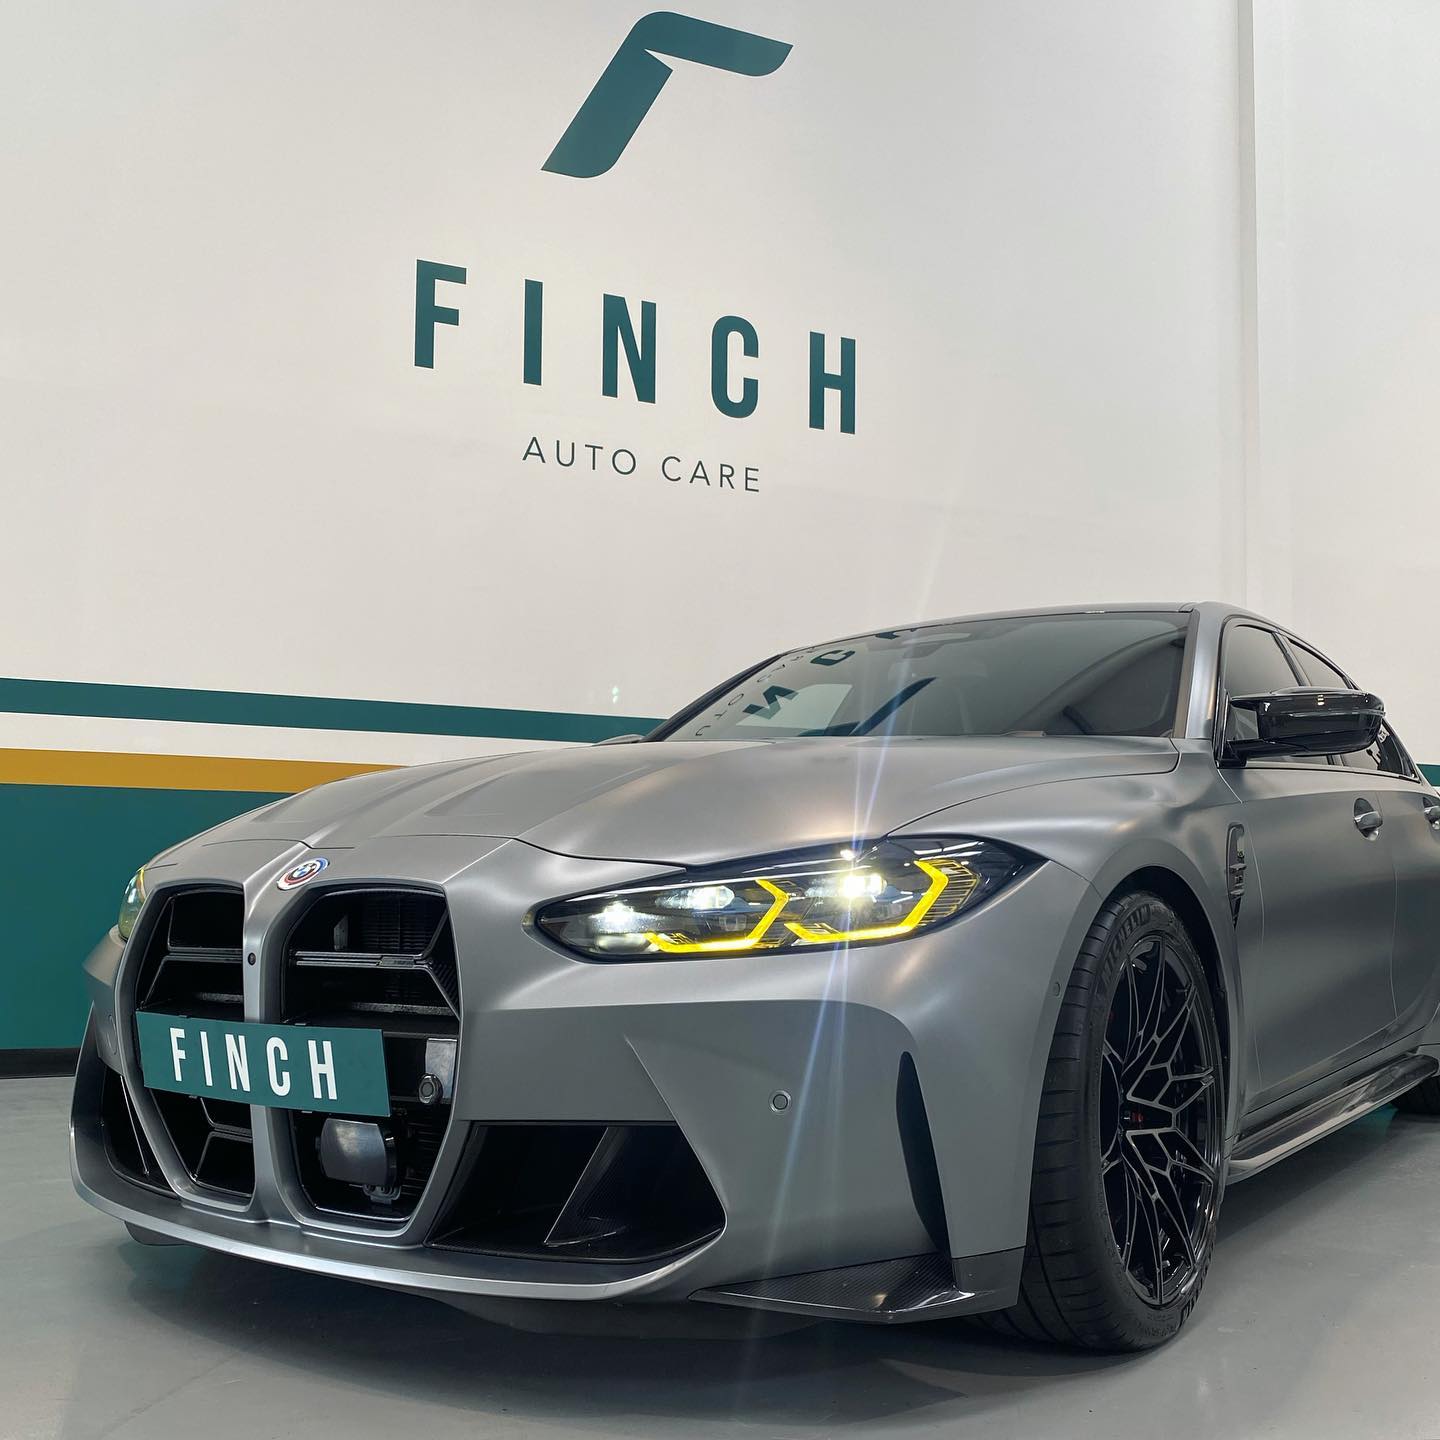 A matte grey sports car displayed in a showroom with the "finch auto care" logo on the wall behind it.